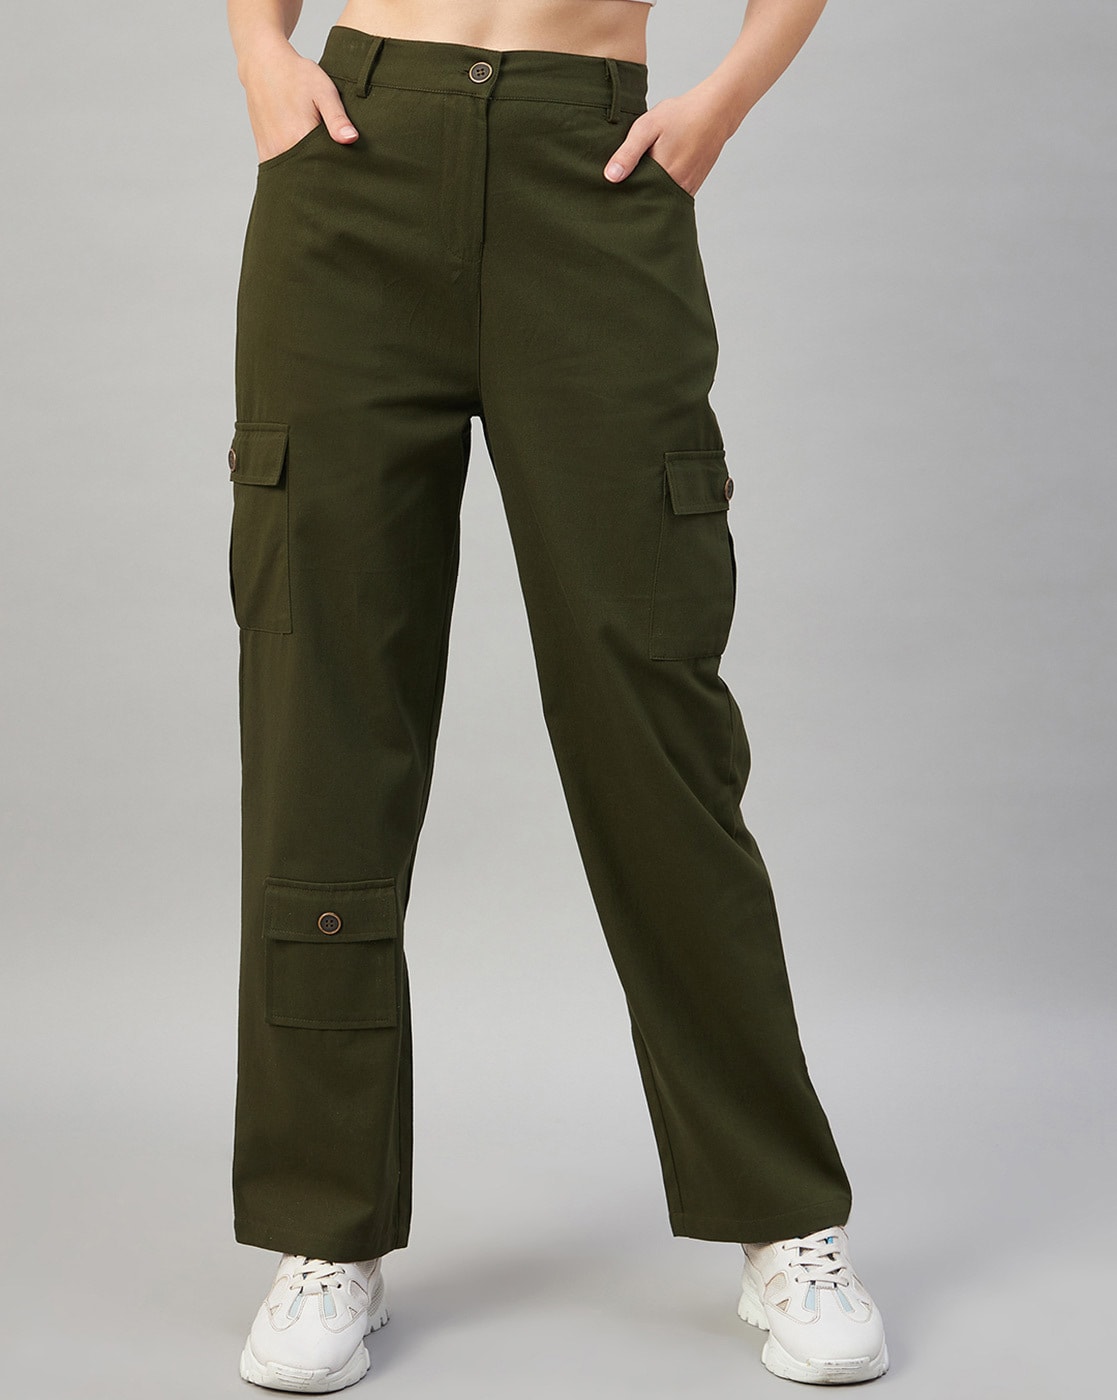 Military Green Camouflage Cargo Pants For Women Plus Size Dance Overalls  And Large Army Trousers Mens From Happy_snow, $33.42 | DHgate.Com